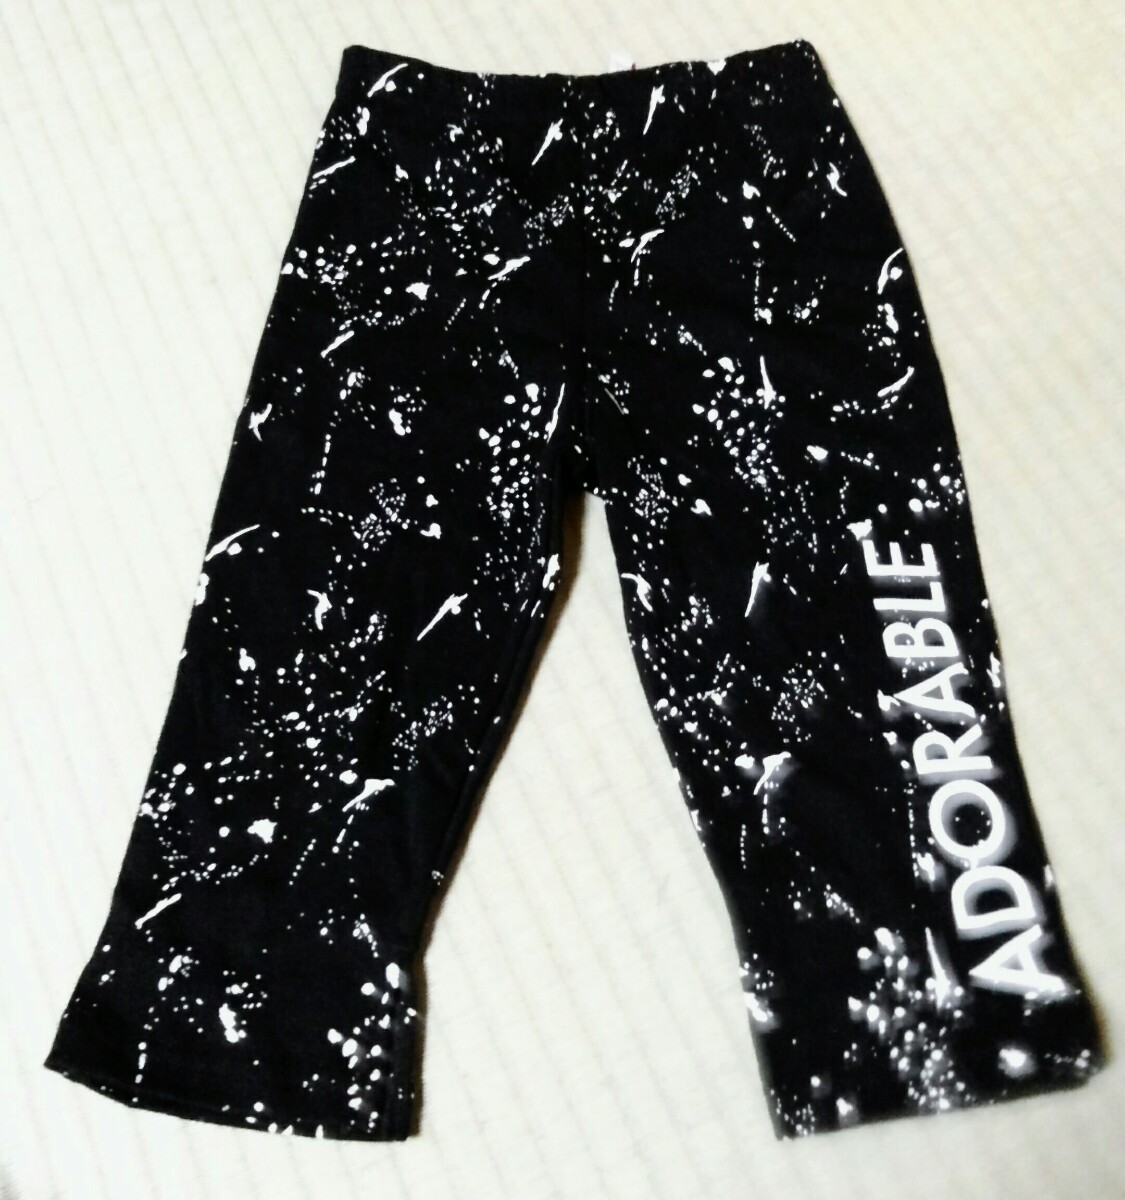  sweat pants 120 size Kids two or more successful bids including in a package possible 